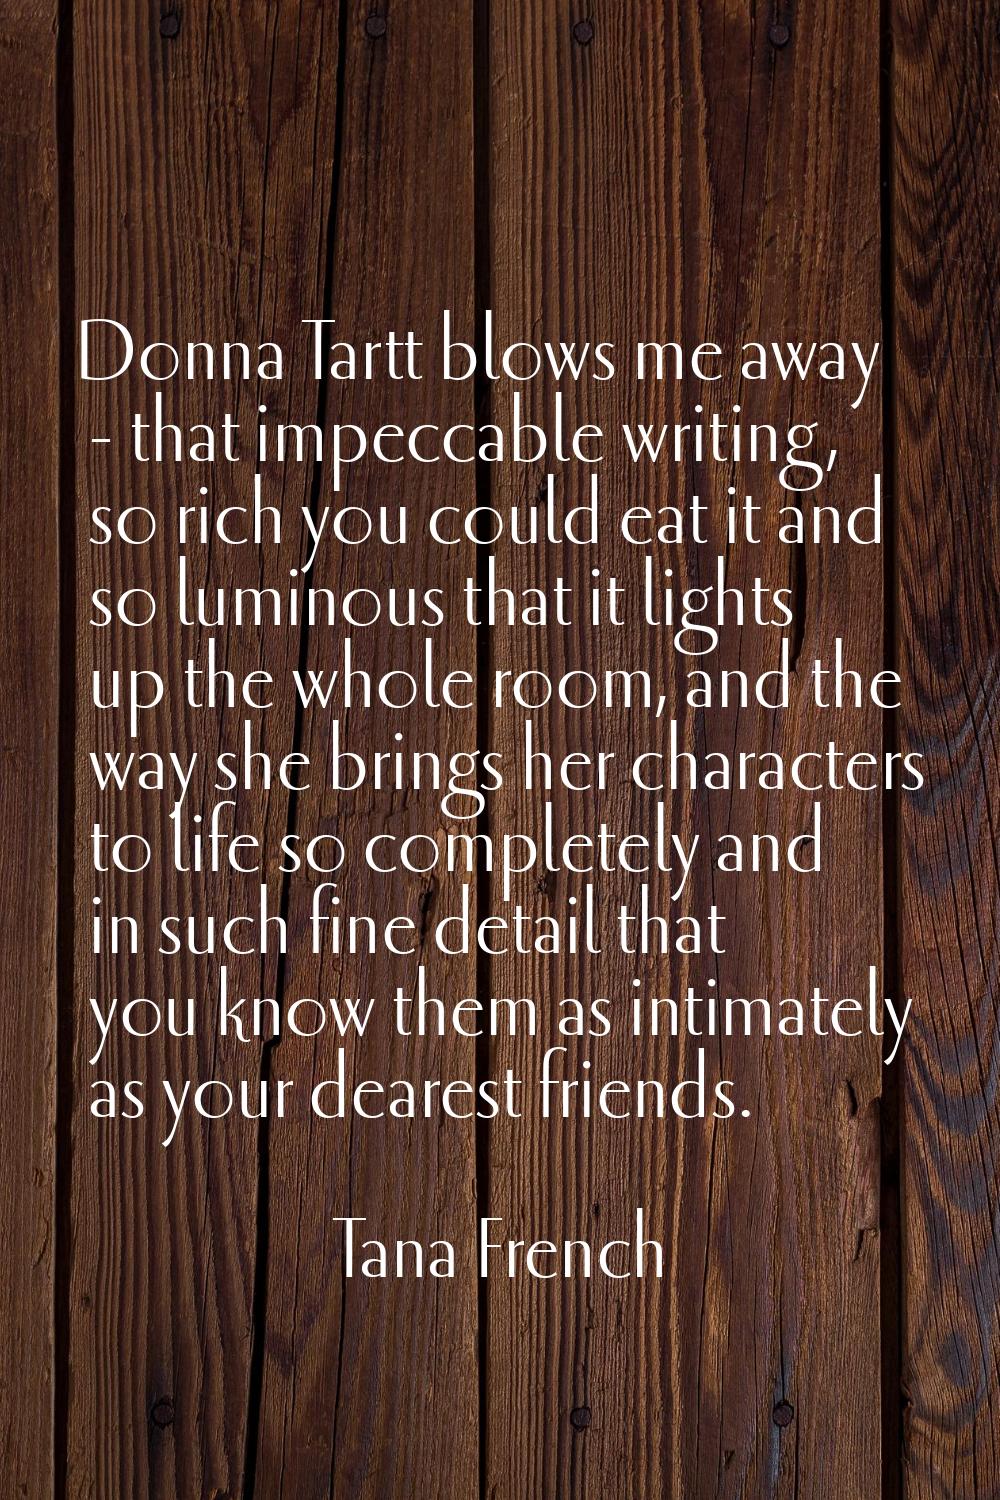 Donna Tartt blows me away - that impeccable writing, so rich you could eat it and so luminous that 